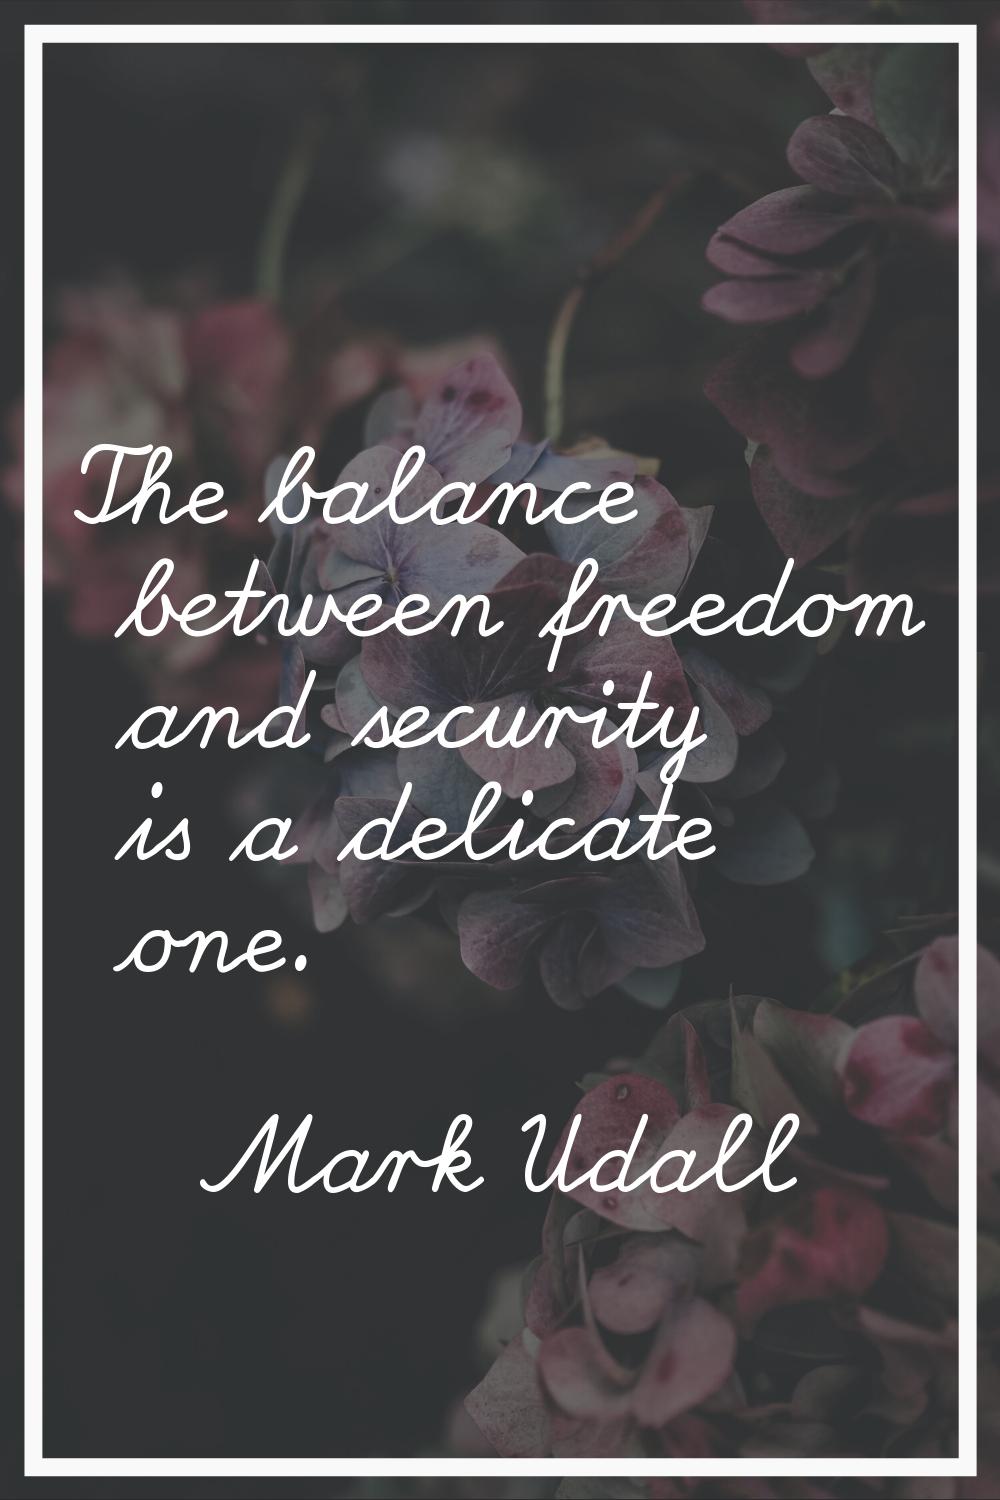 The balance between freedom and security is a delicate one.